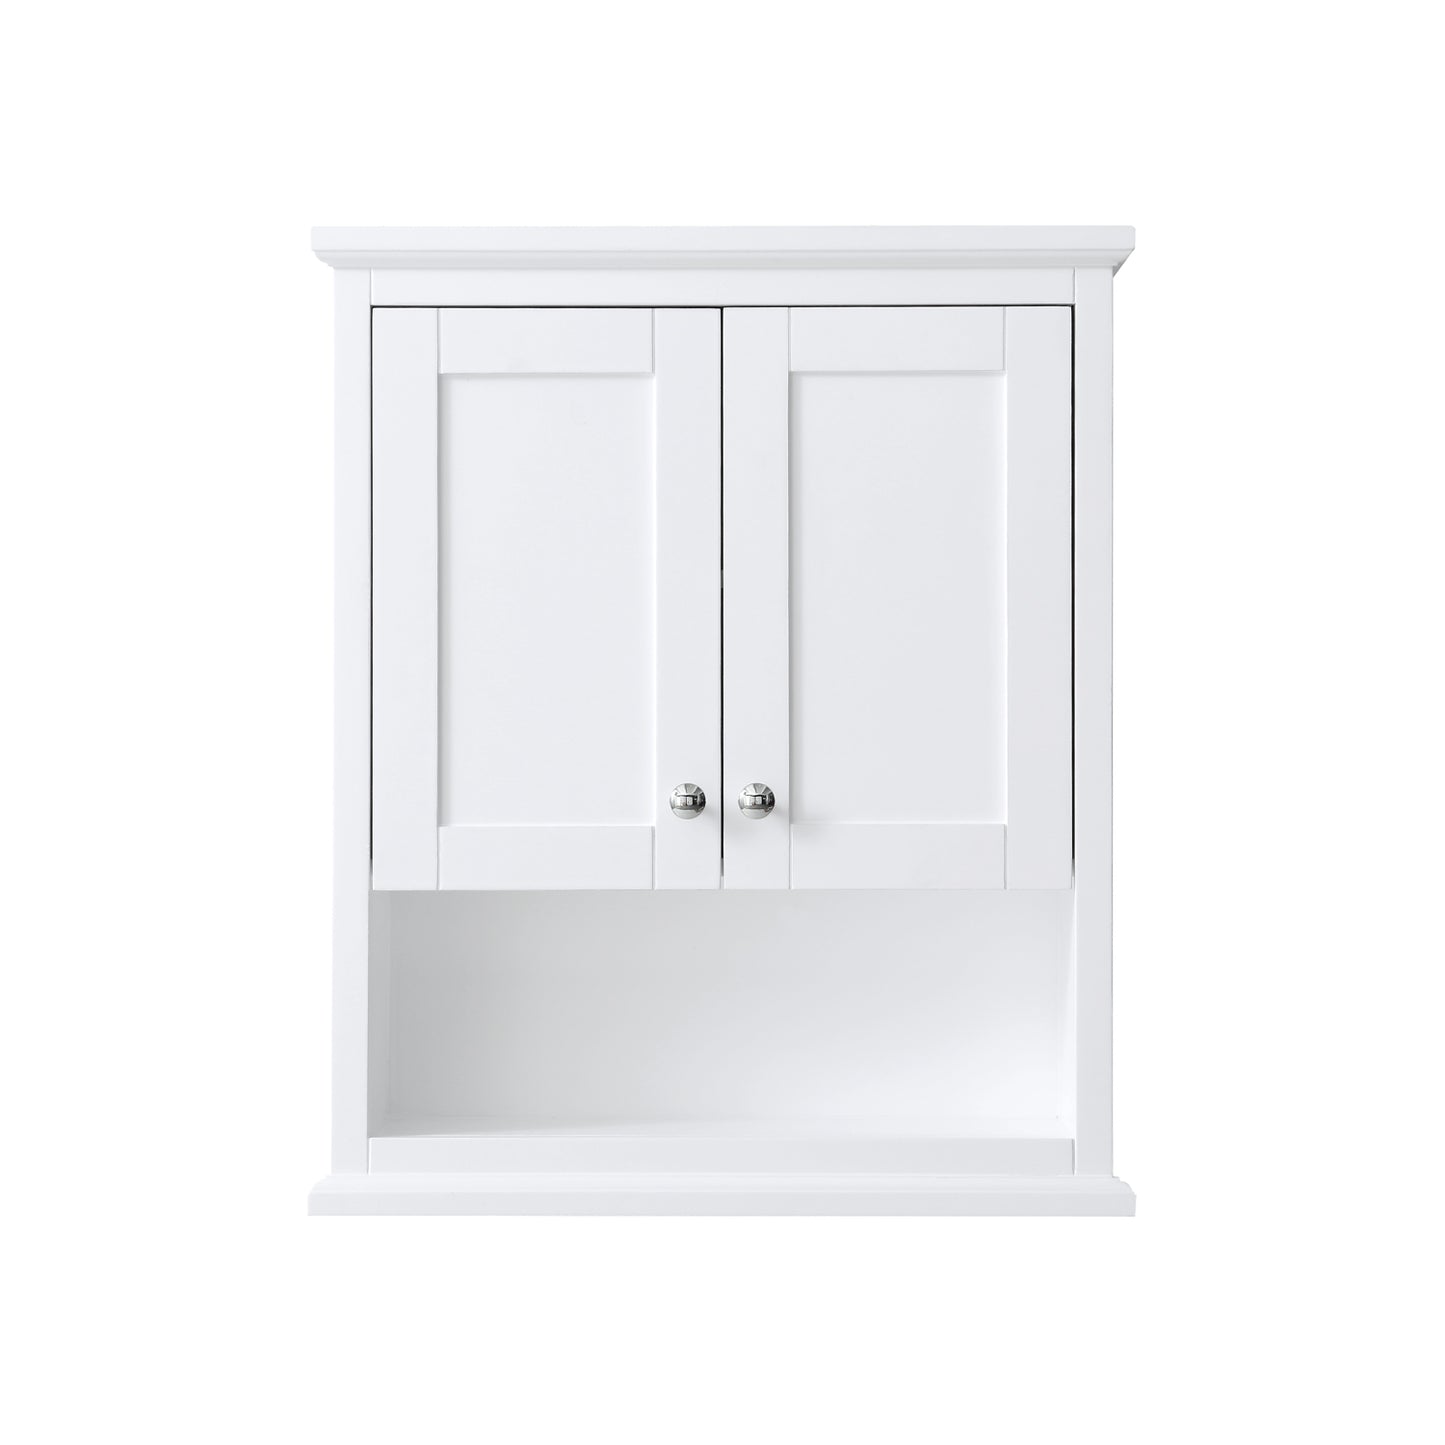 Wall-Mounted Bathroom Storage Cabinet - Luxe Bathroom Vanities Luxury Bathroom Fixtures Bathroom Furniture